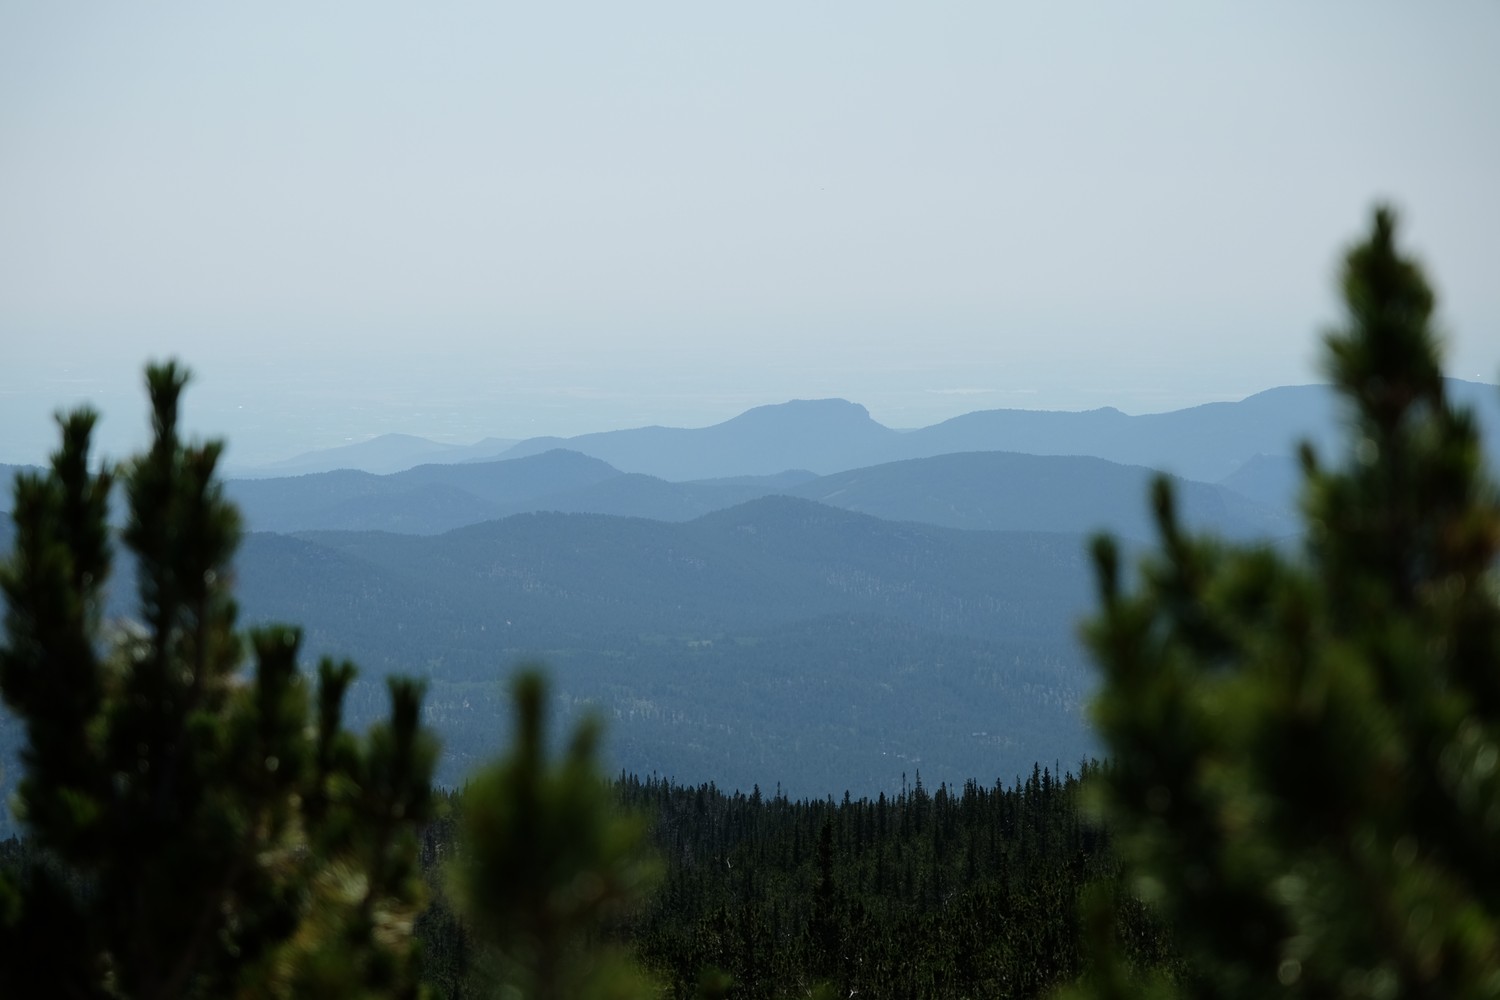 Hazy silhouettes of hills in the distance framed by out of focus trees in the foreground